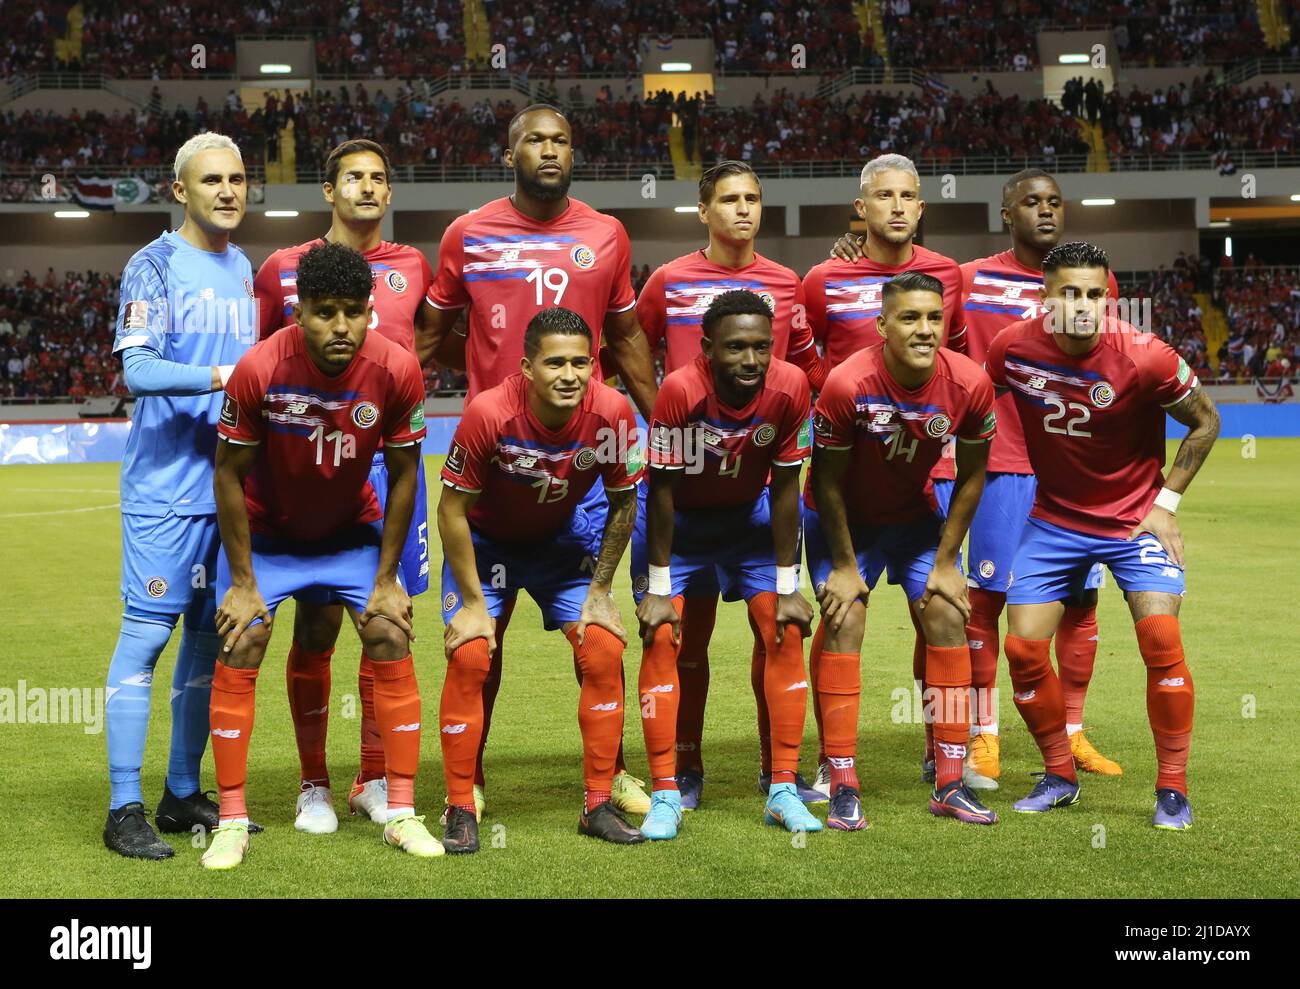 Soccer Football - World Cup - Concacaf Qualifiers - Costa Rica v Canada -  The National Stadium of Costa Rica, San Jose, Costa Rica - March 24, 2022  Costa Rica players pose